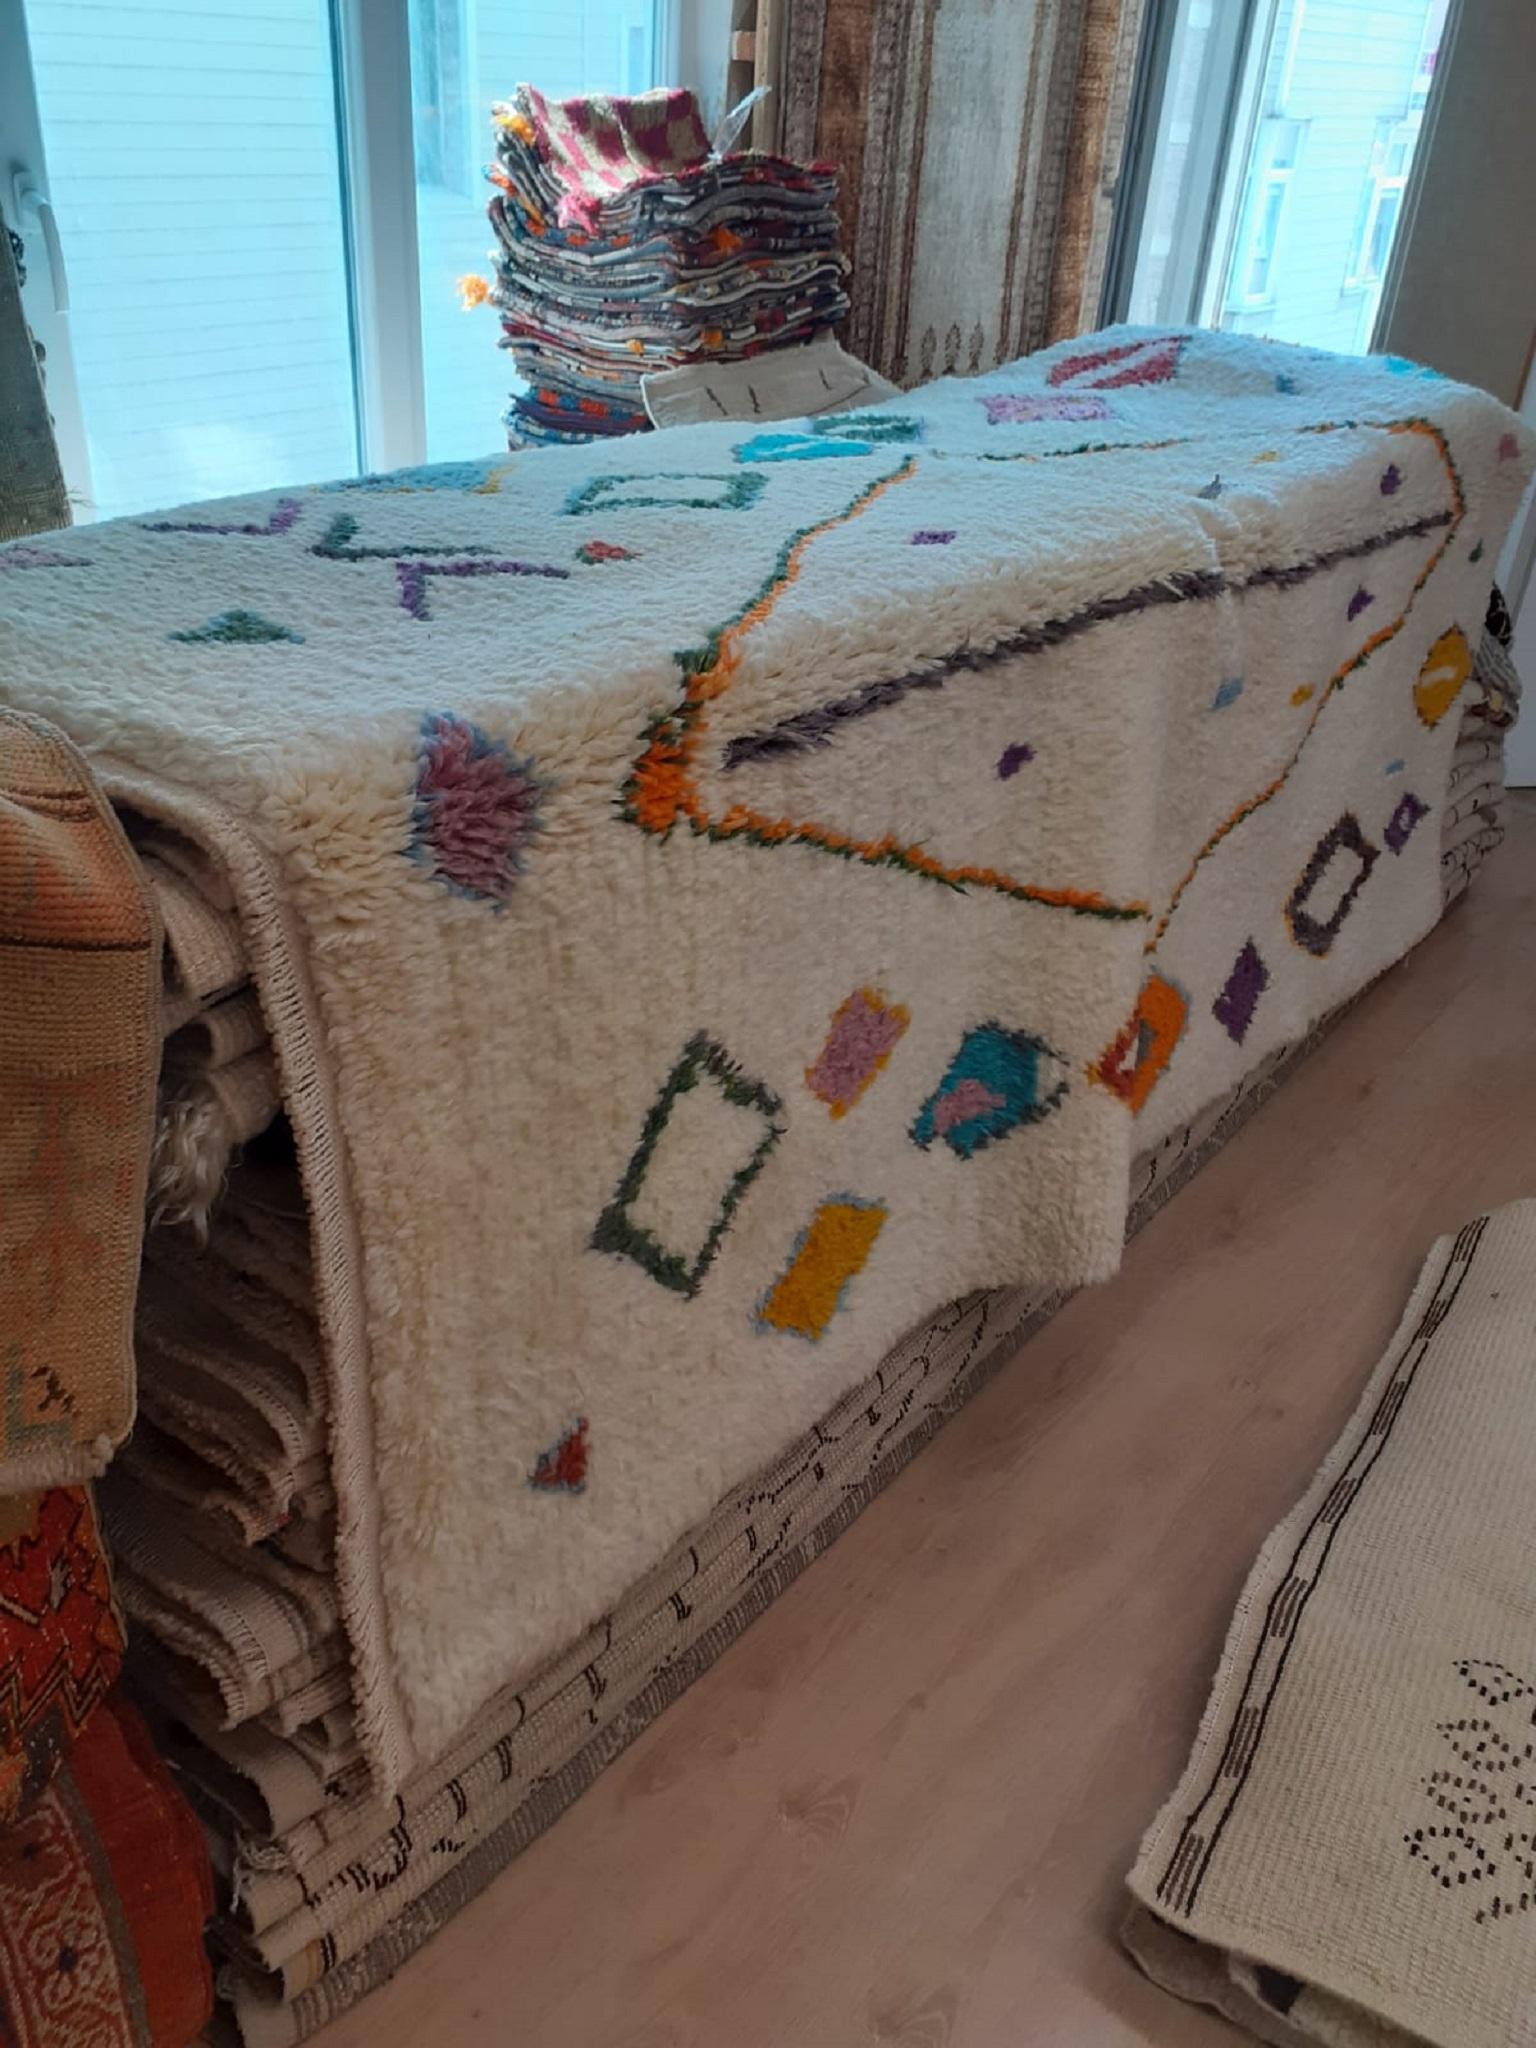 An exquisite brand-new Moroccan rug hand knotted from fine hand-spun sheep's wool with a bold, pattern in a beautiful palette of eye-catching, bright colors including bright turquoise, candy pink, burnt orange, bright orange, dark rich goldenrod,